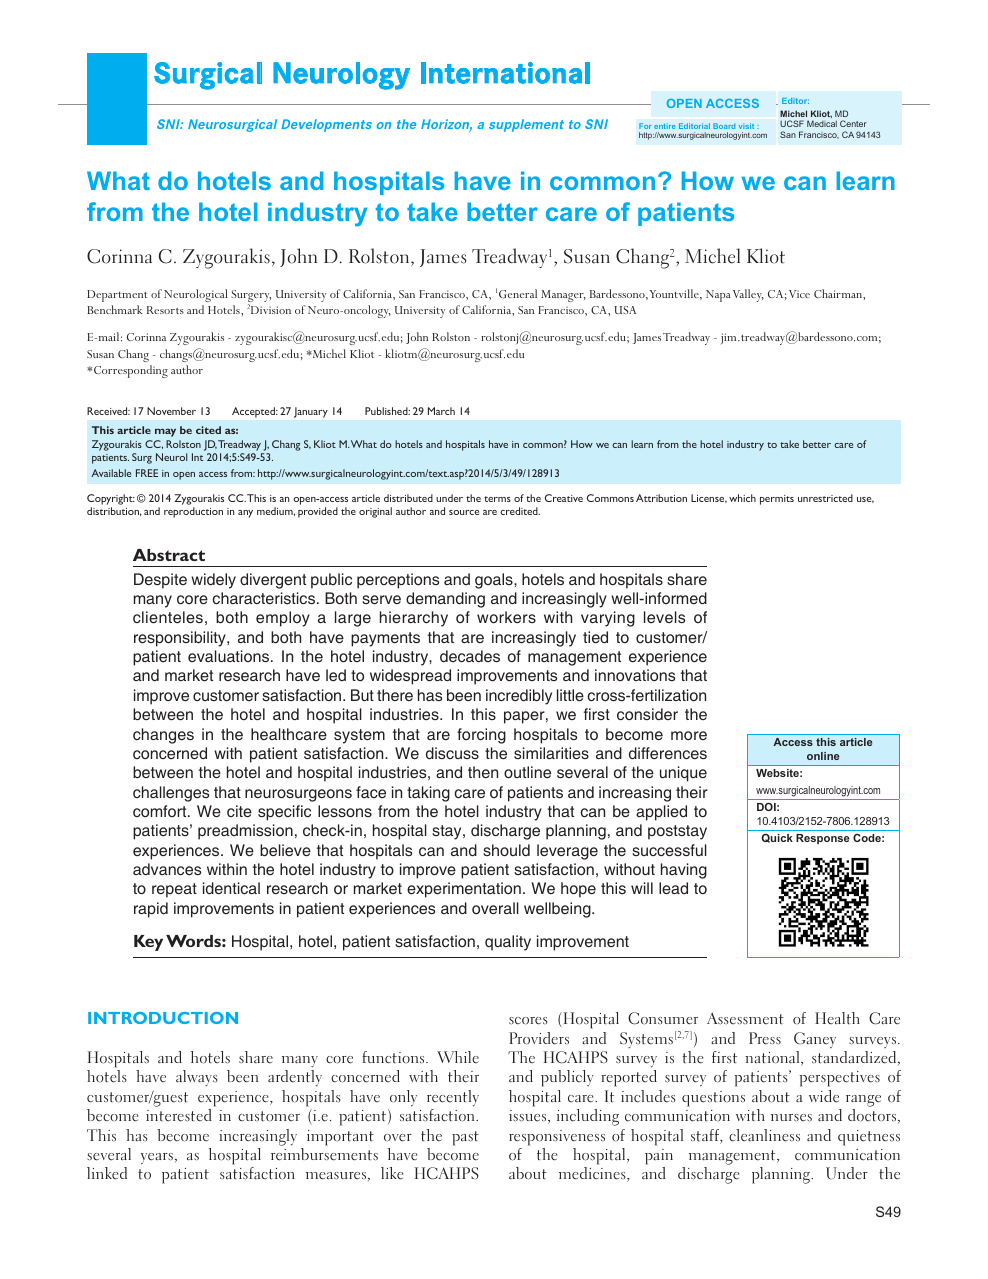 What do hotels and hospitals have in common? How we can learn from ...